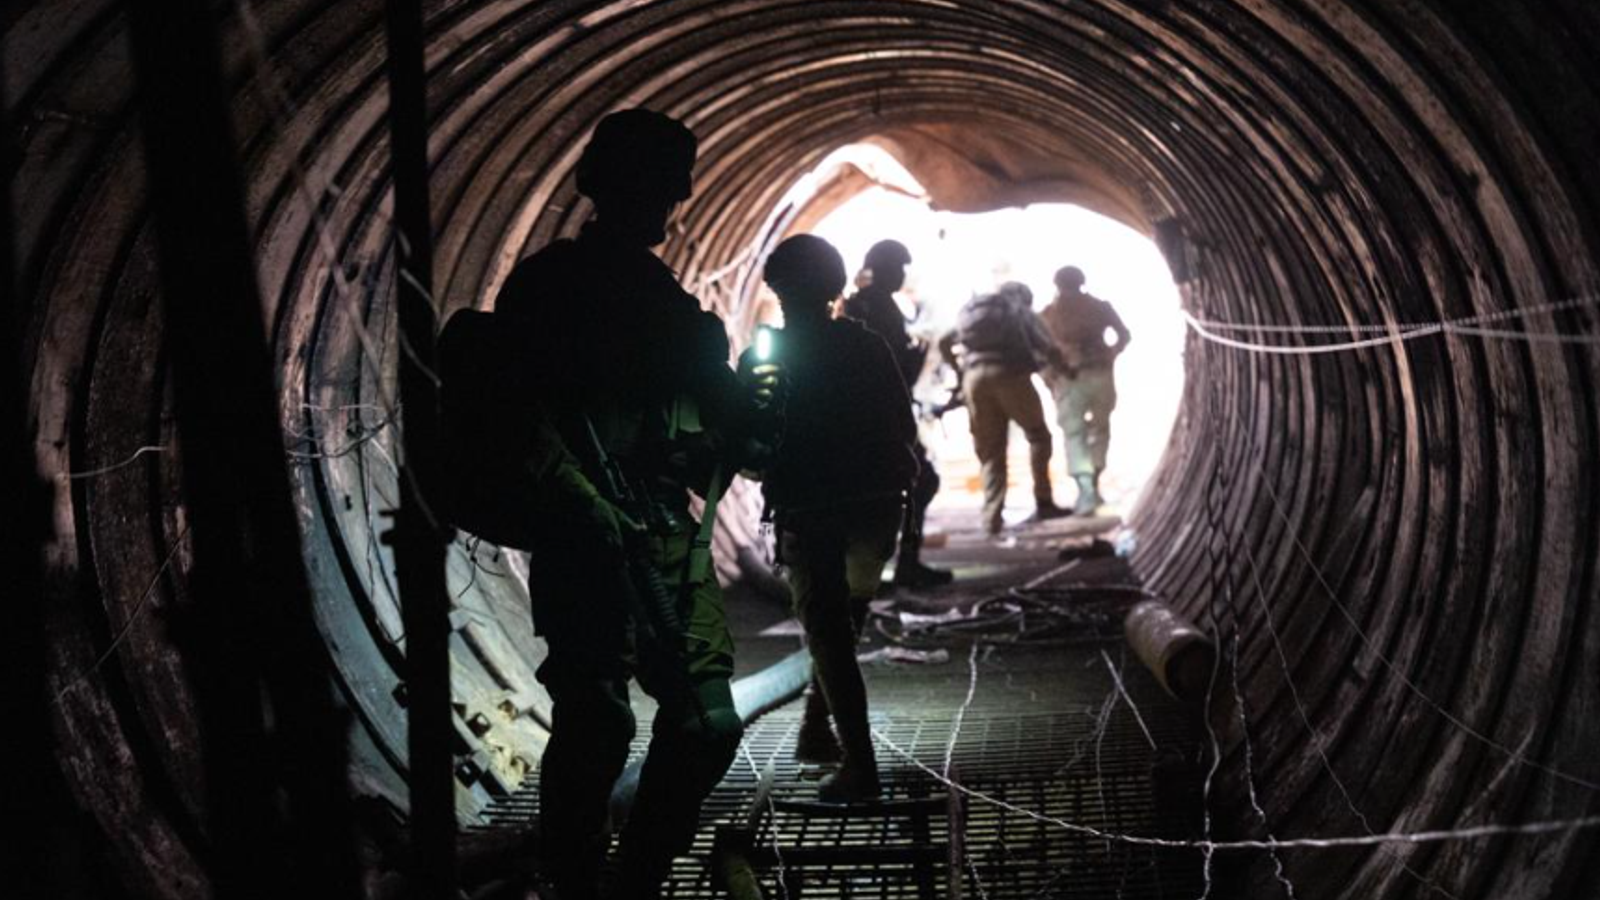 Israel claims to have discovered biggest Hamas tunnel yet in Gaza